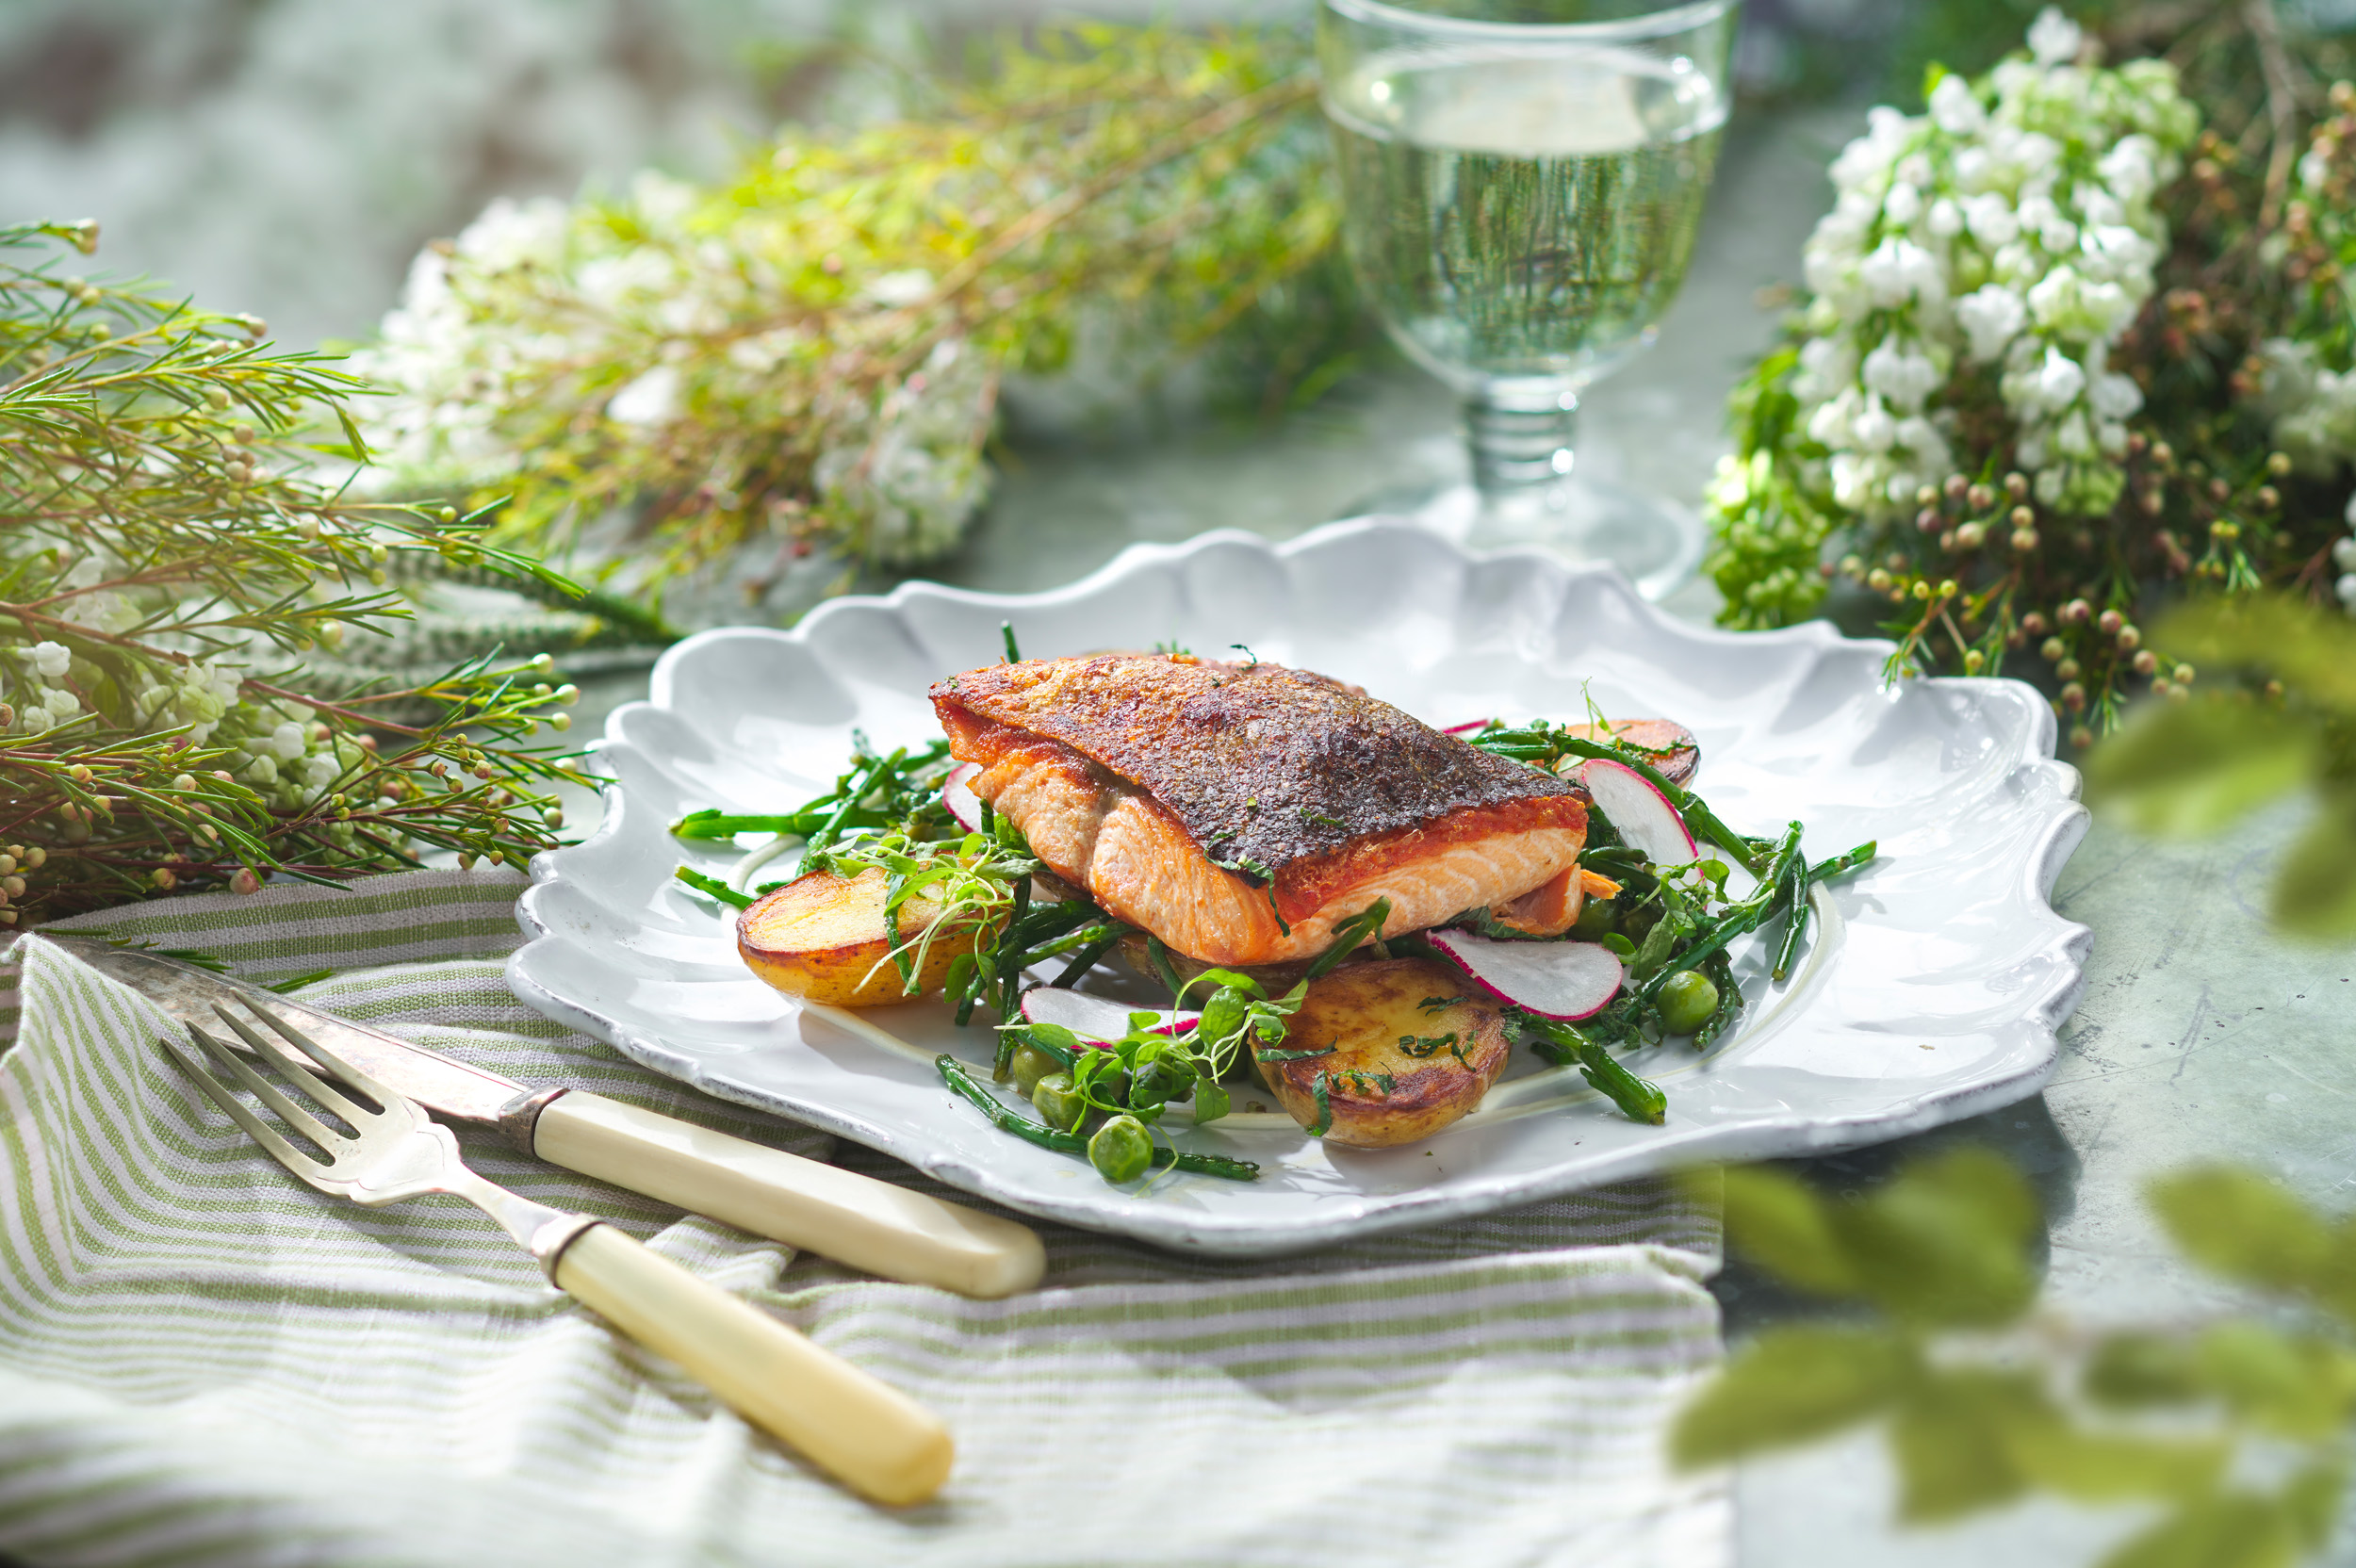 https://www.drakeandmorgan.co.uk/the-parlour/wp-content/uploads/2022/03/Seafood-Trout-1.jpg